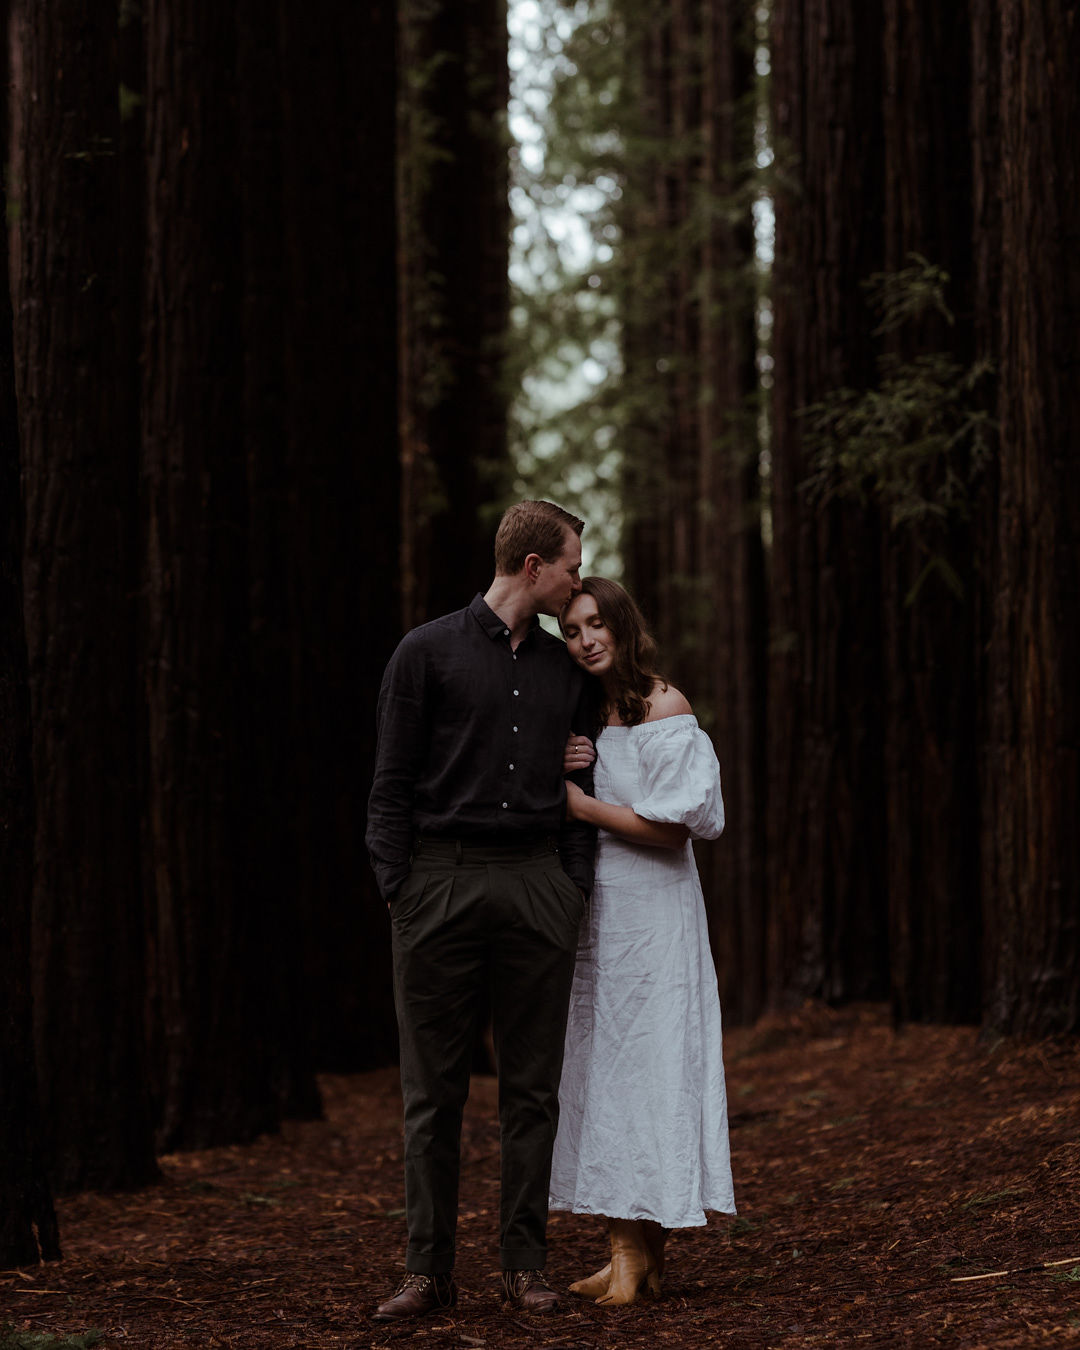 Couple cherishing a moment in the redwood forest